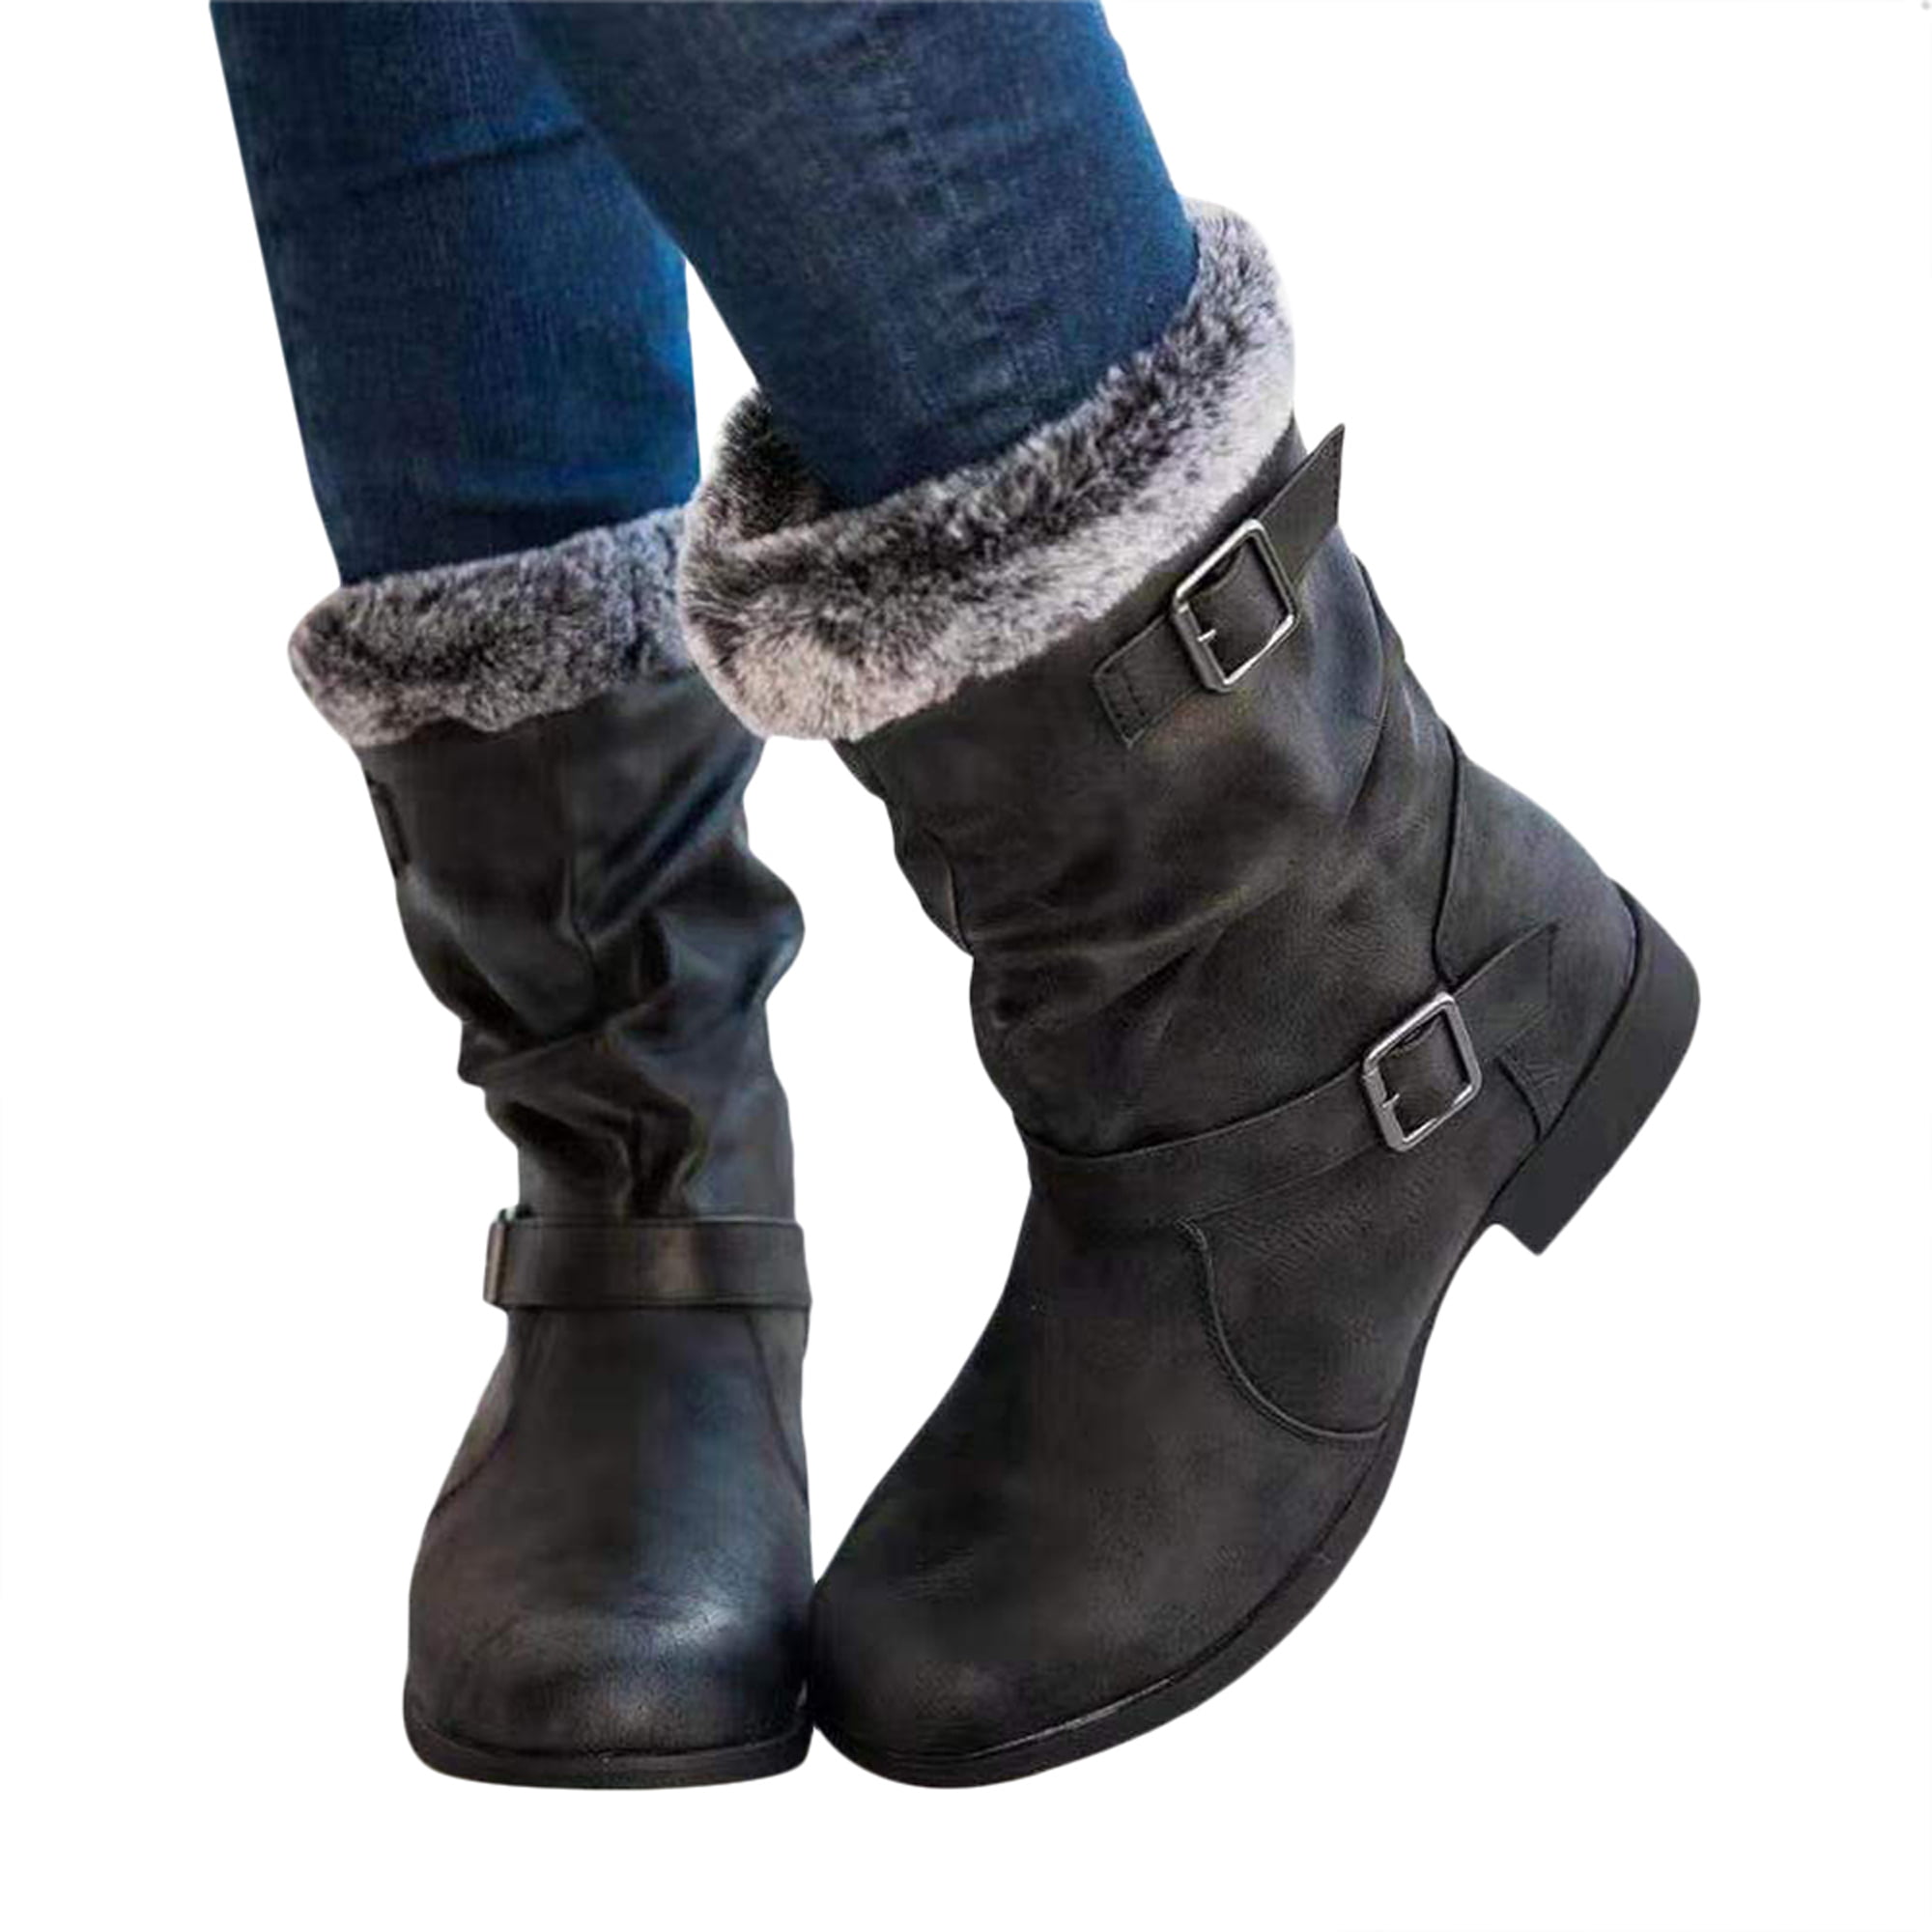 F1rst Rate Snow Boots Womens Winter Warm Booties Low Wedge Buckle Biker Ankle Trim Flat Ankle Boots Shoes